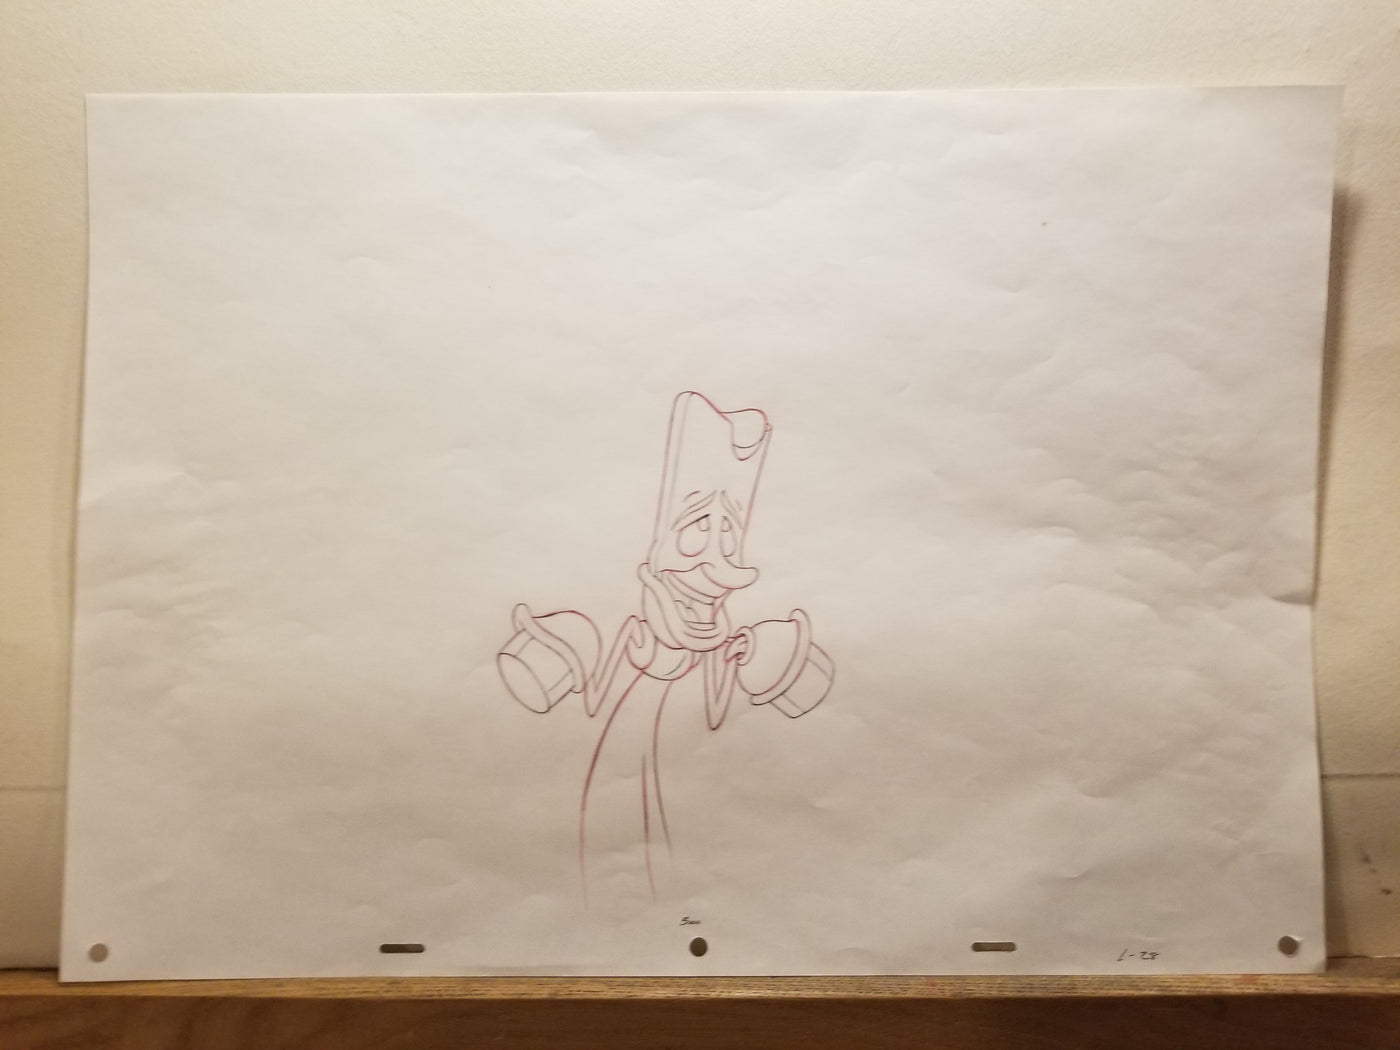 Original Walt Disney Production Drawing from Beauty and the Beast featuring Lumiere